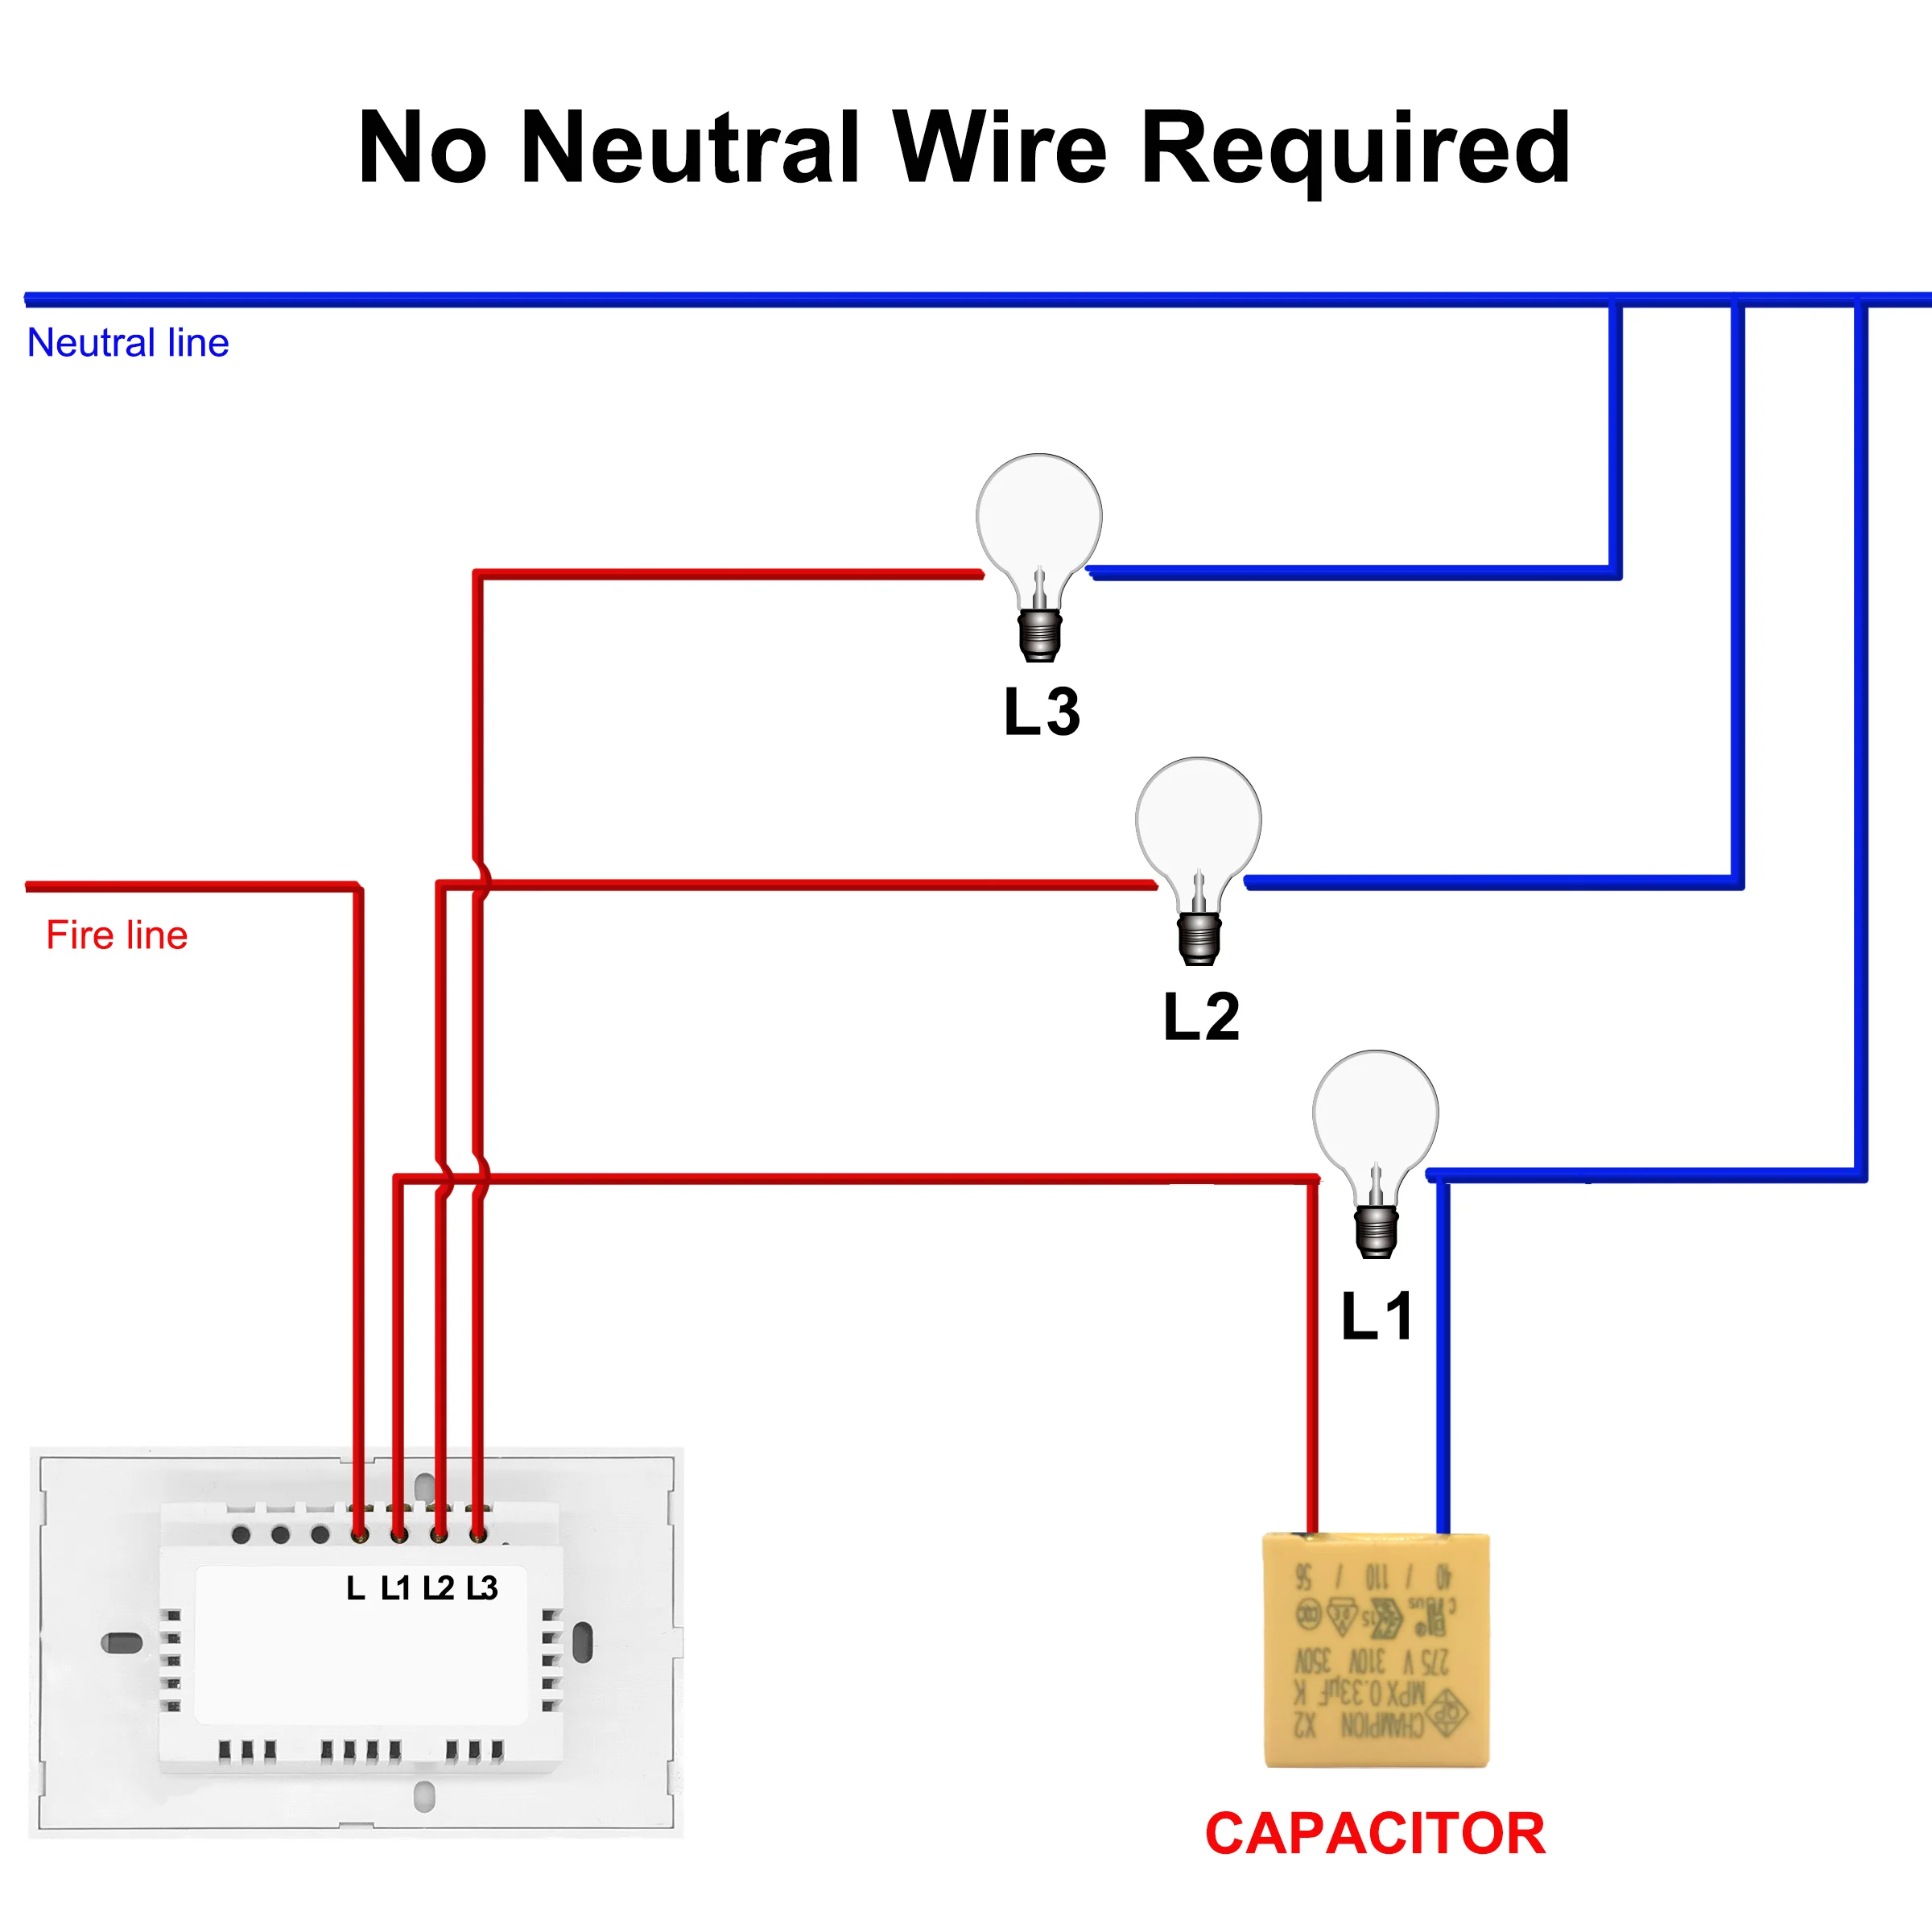 Installation and Wiring Requirements